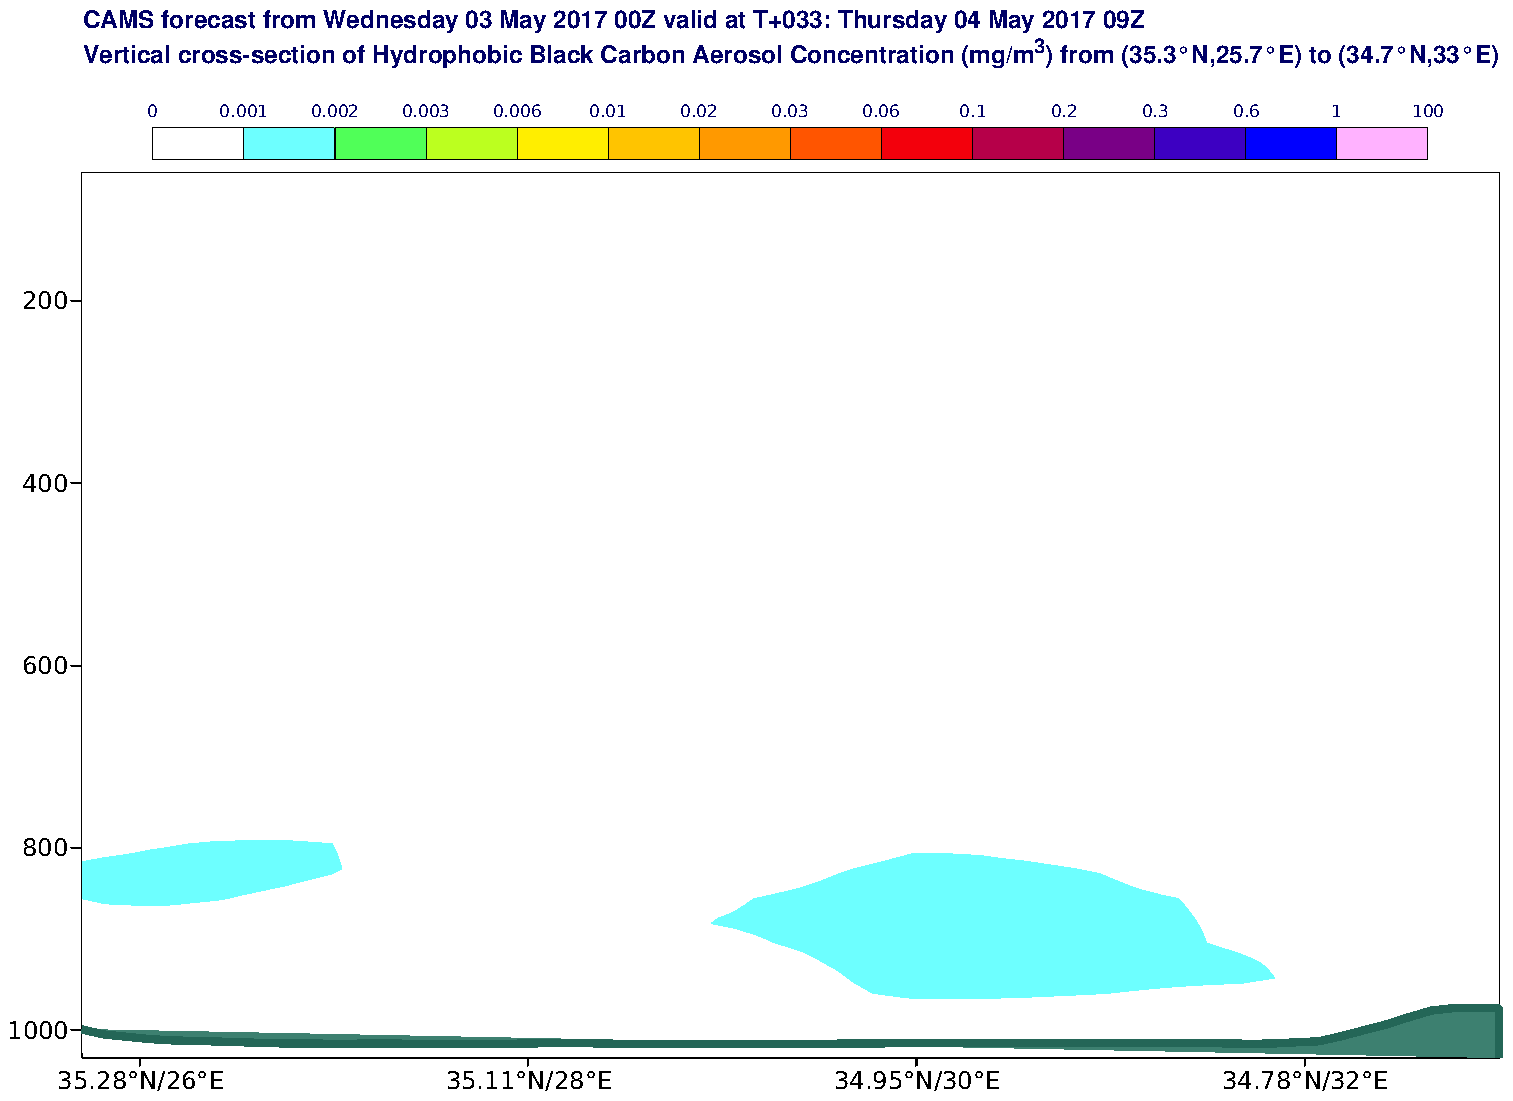 Vertical cross-section of Hydrophobic Black Carbon Aerosol Concentration (mg/m3) valid at T33 - 2017-05-04 09:00